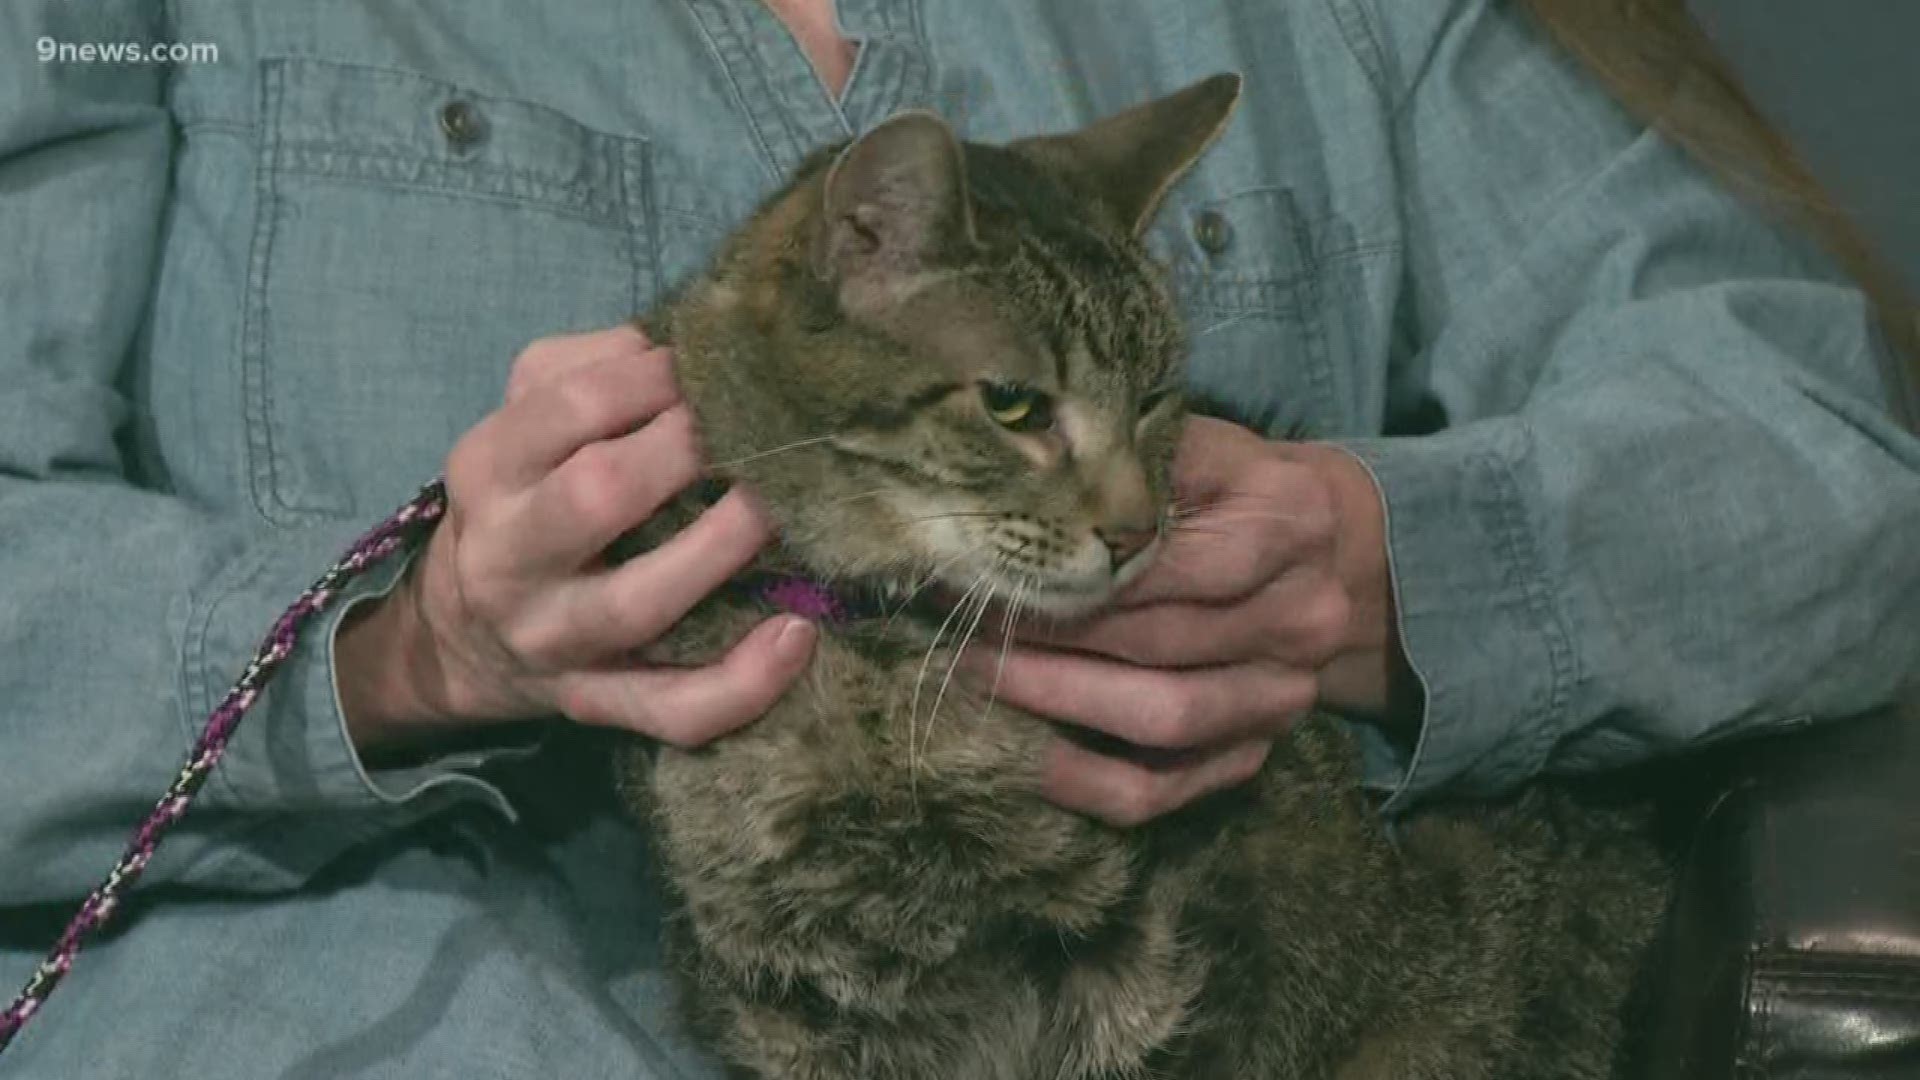 Jazz, a 12-year-old Tabby cat has Feline Leukemia and it looking for a new home to live out the rest of his days. He's available at the Cat Care Society.